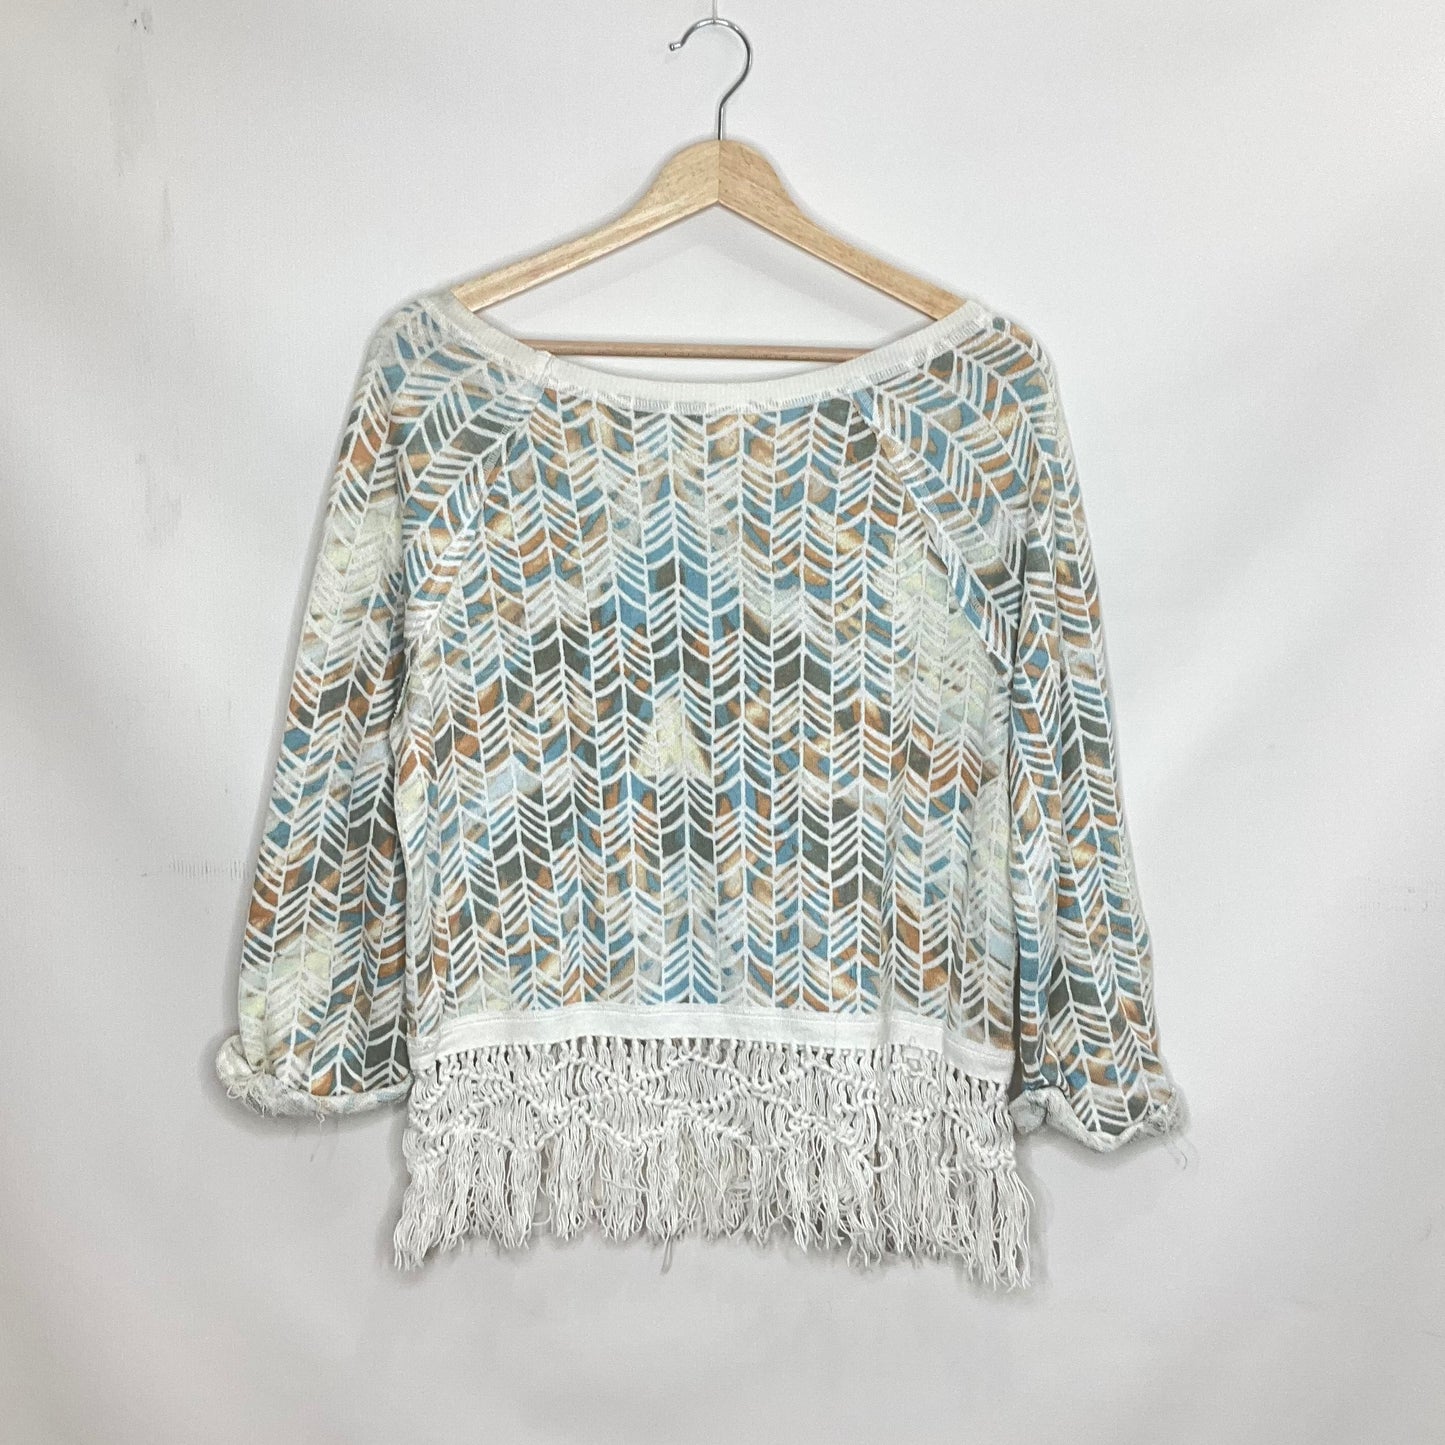 Blue & White Top Long Sleeve Free People, Size S